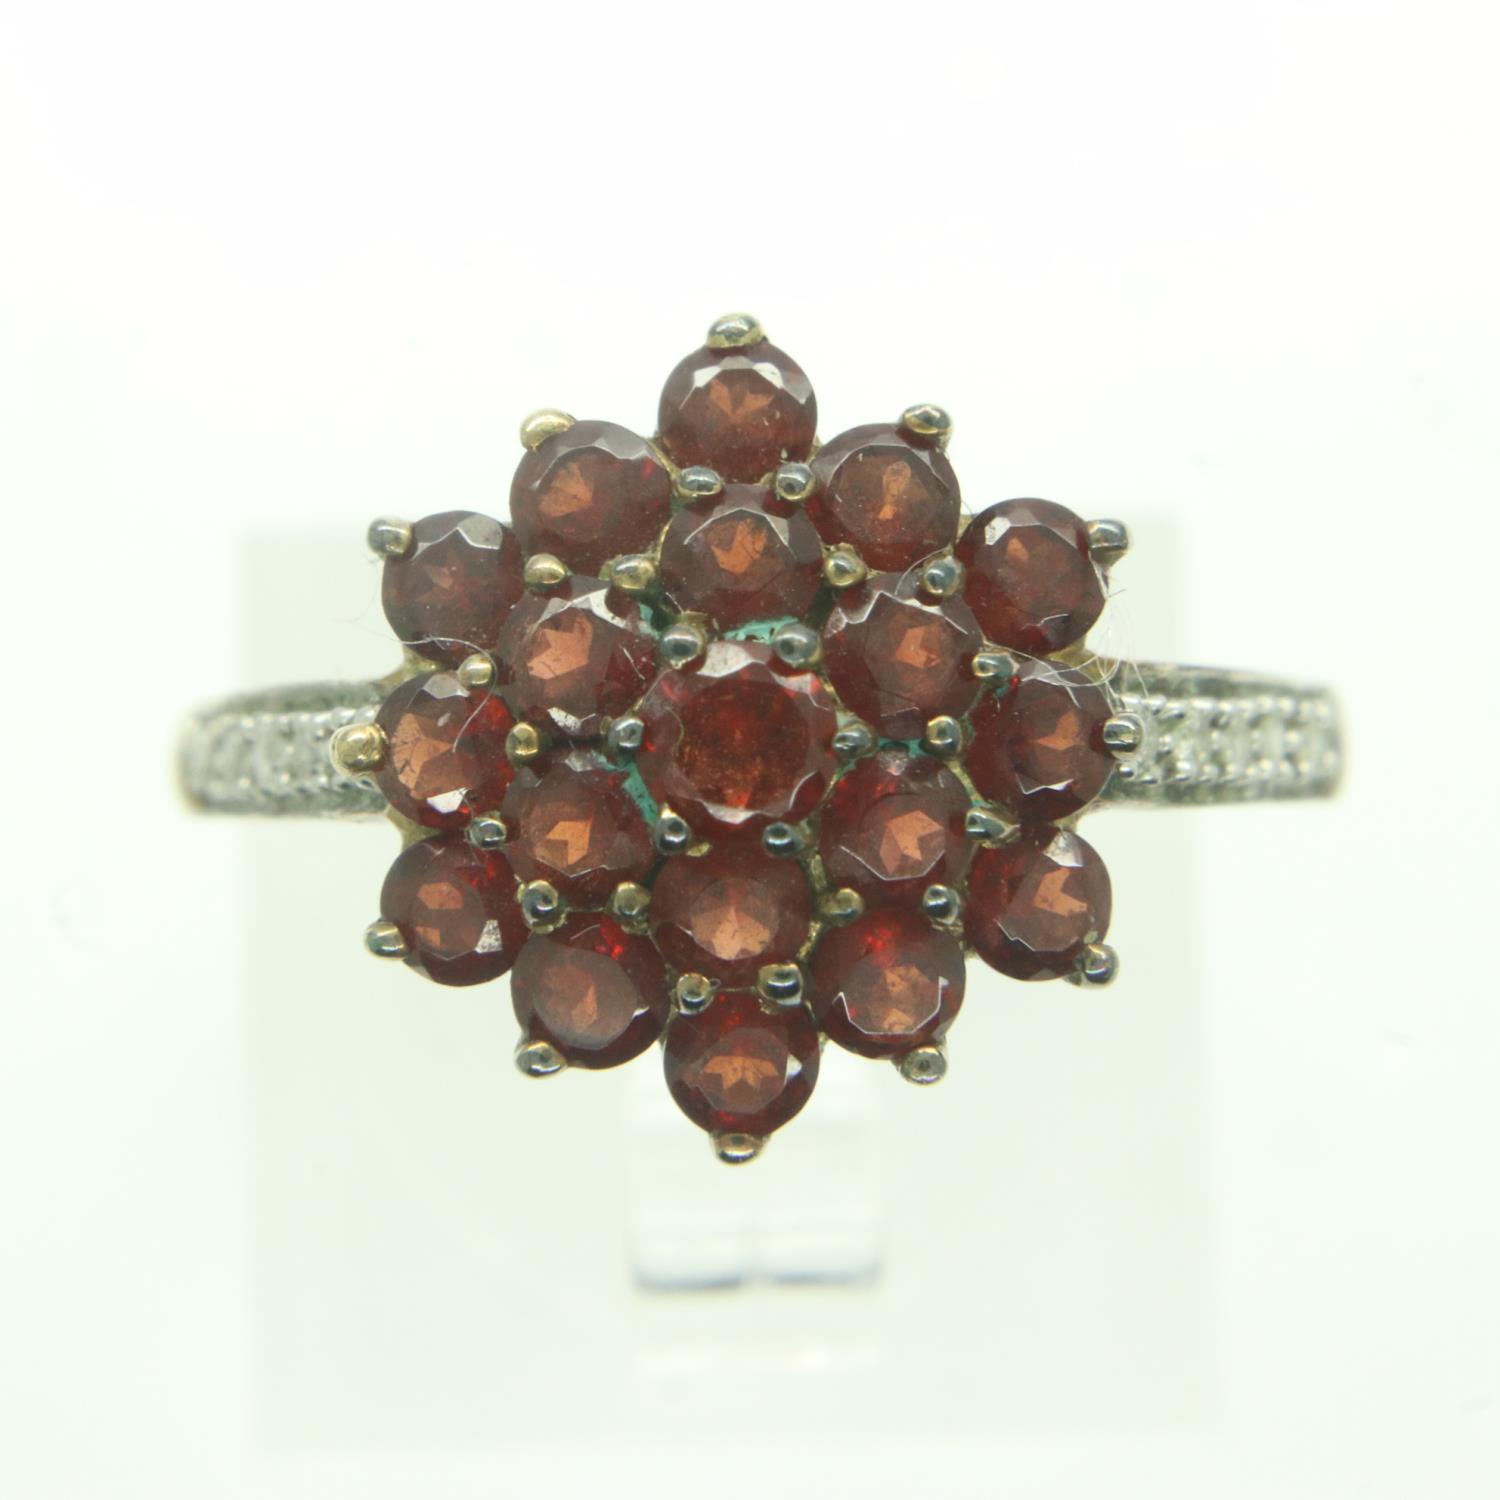 9ct gold cluster ring set with red stones and diamonds, size P, 2.9g. UK P&P Group 0 (£6+VAT for the